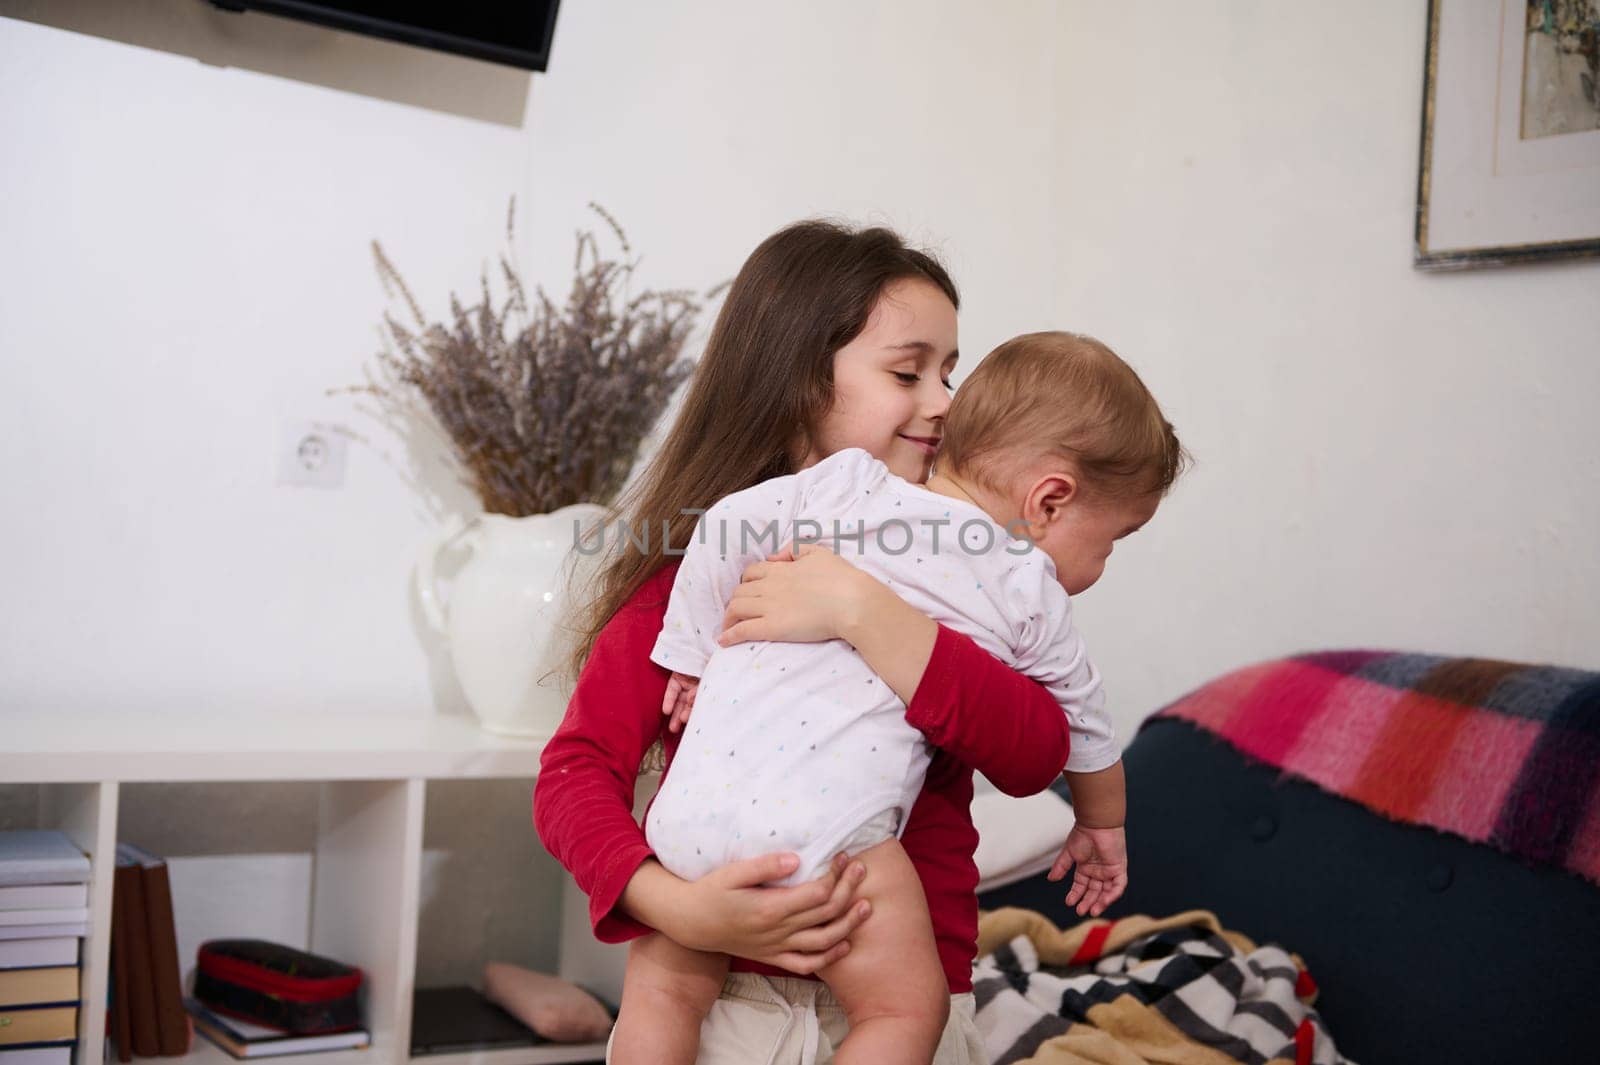 Beautiful girl 6 years old, smiles holding and hugging her little brother, cute baby boy of 6 months old. Family relationships concept. Love. Care. Tenderness. Affection. International Children's Day